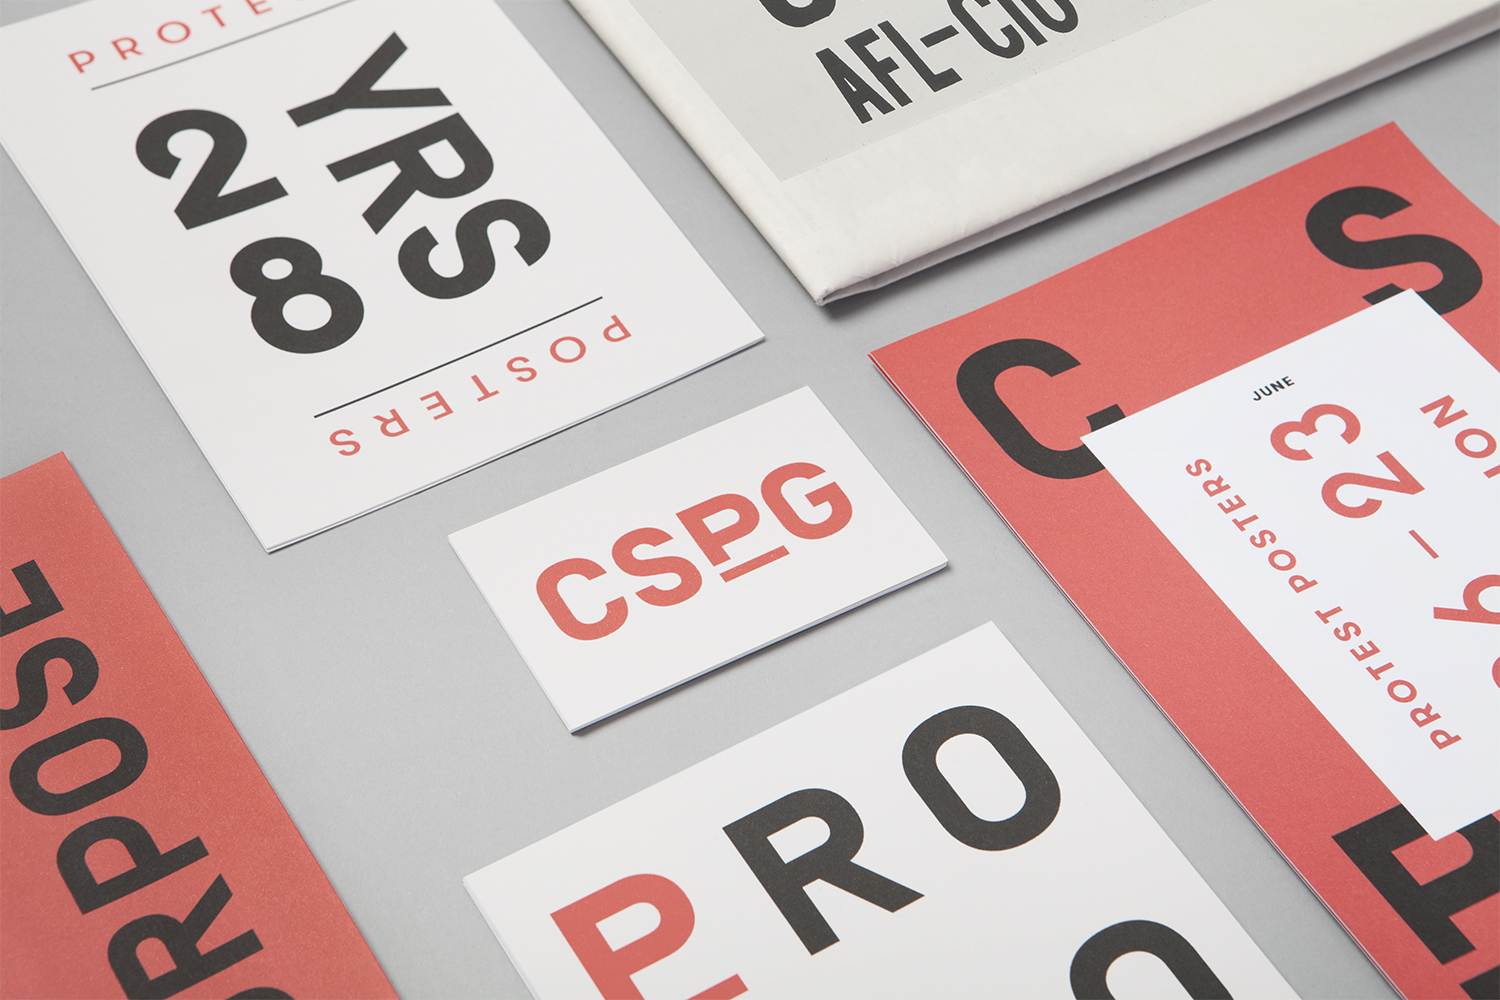 Visual identity and print by Canadian studio Blok for The Center for the Study of Political Graphics